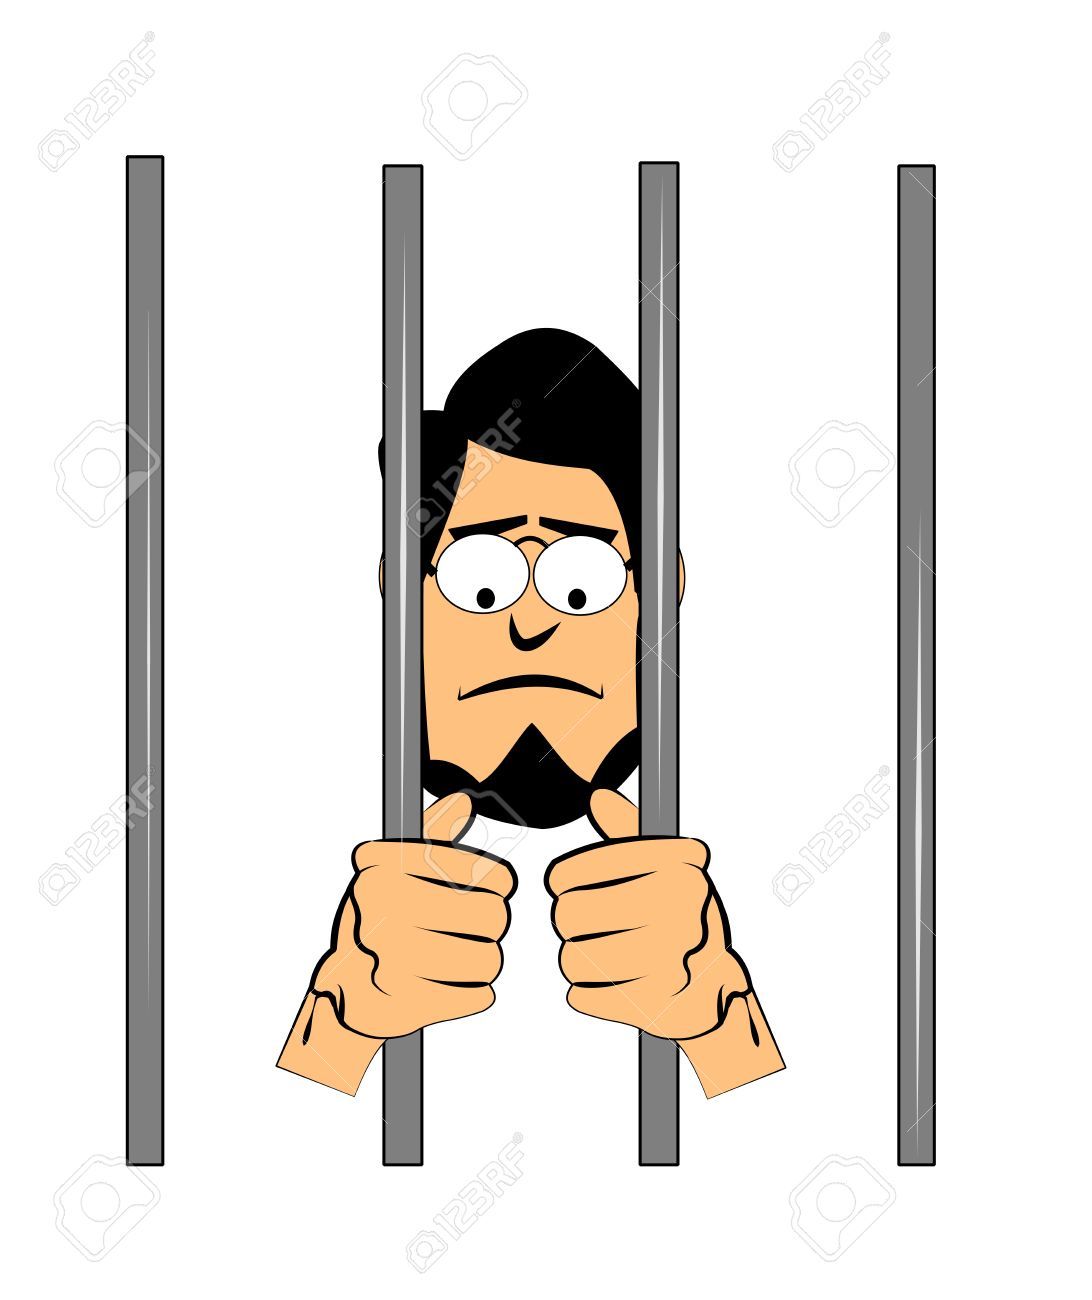 Funny clip art penalty. Jail clipart jail time